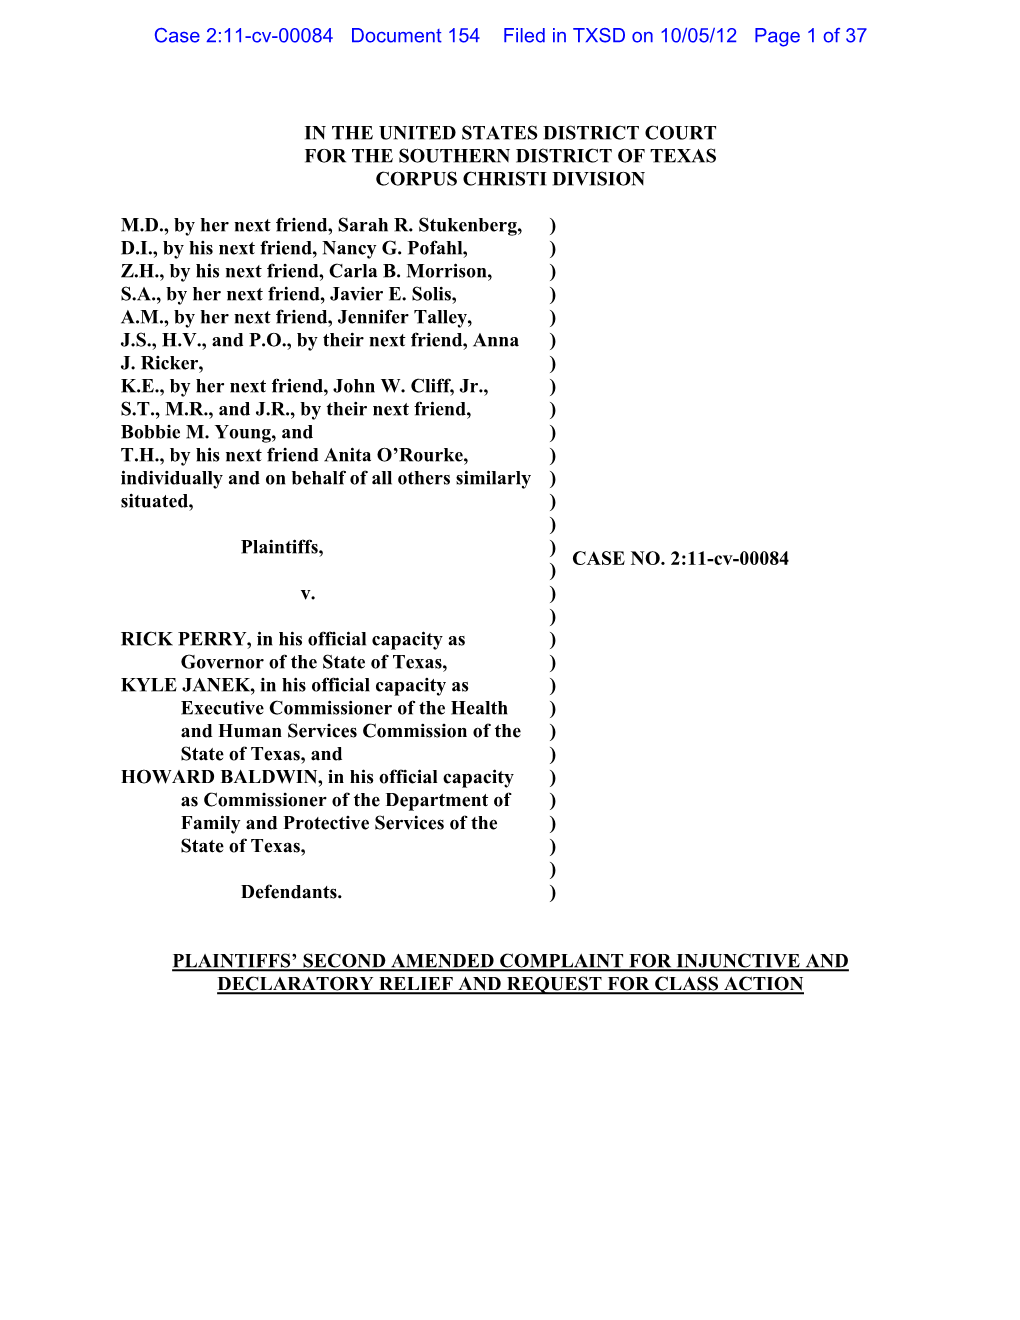 Second Amended Complaint for Injunctive and Declaratory Relief and Request for Class Action